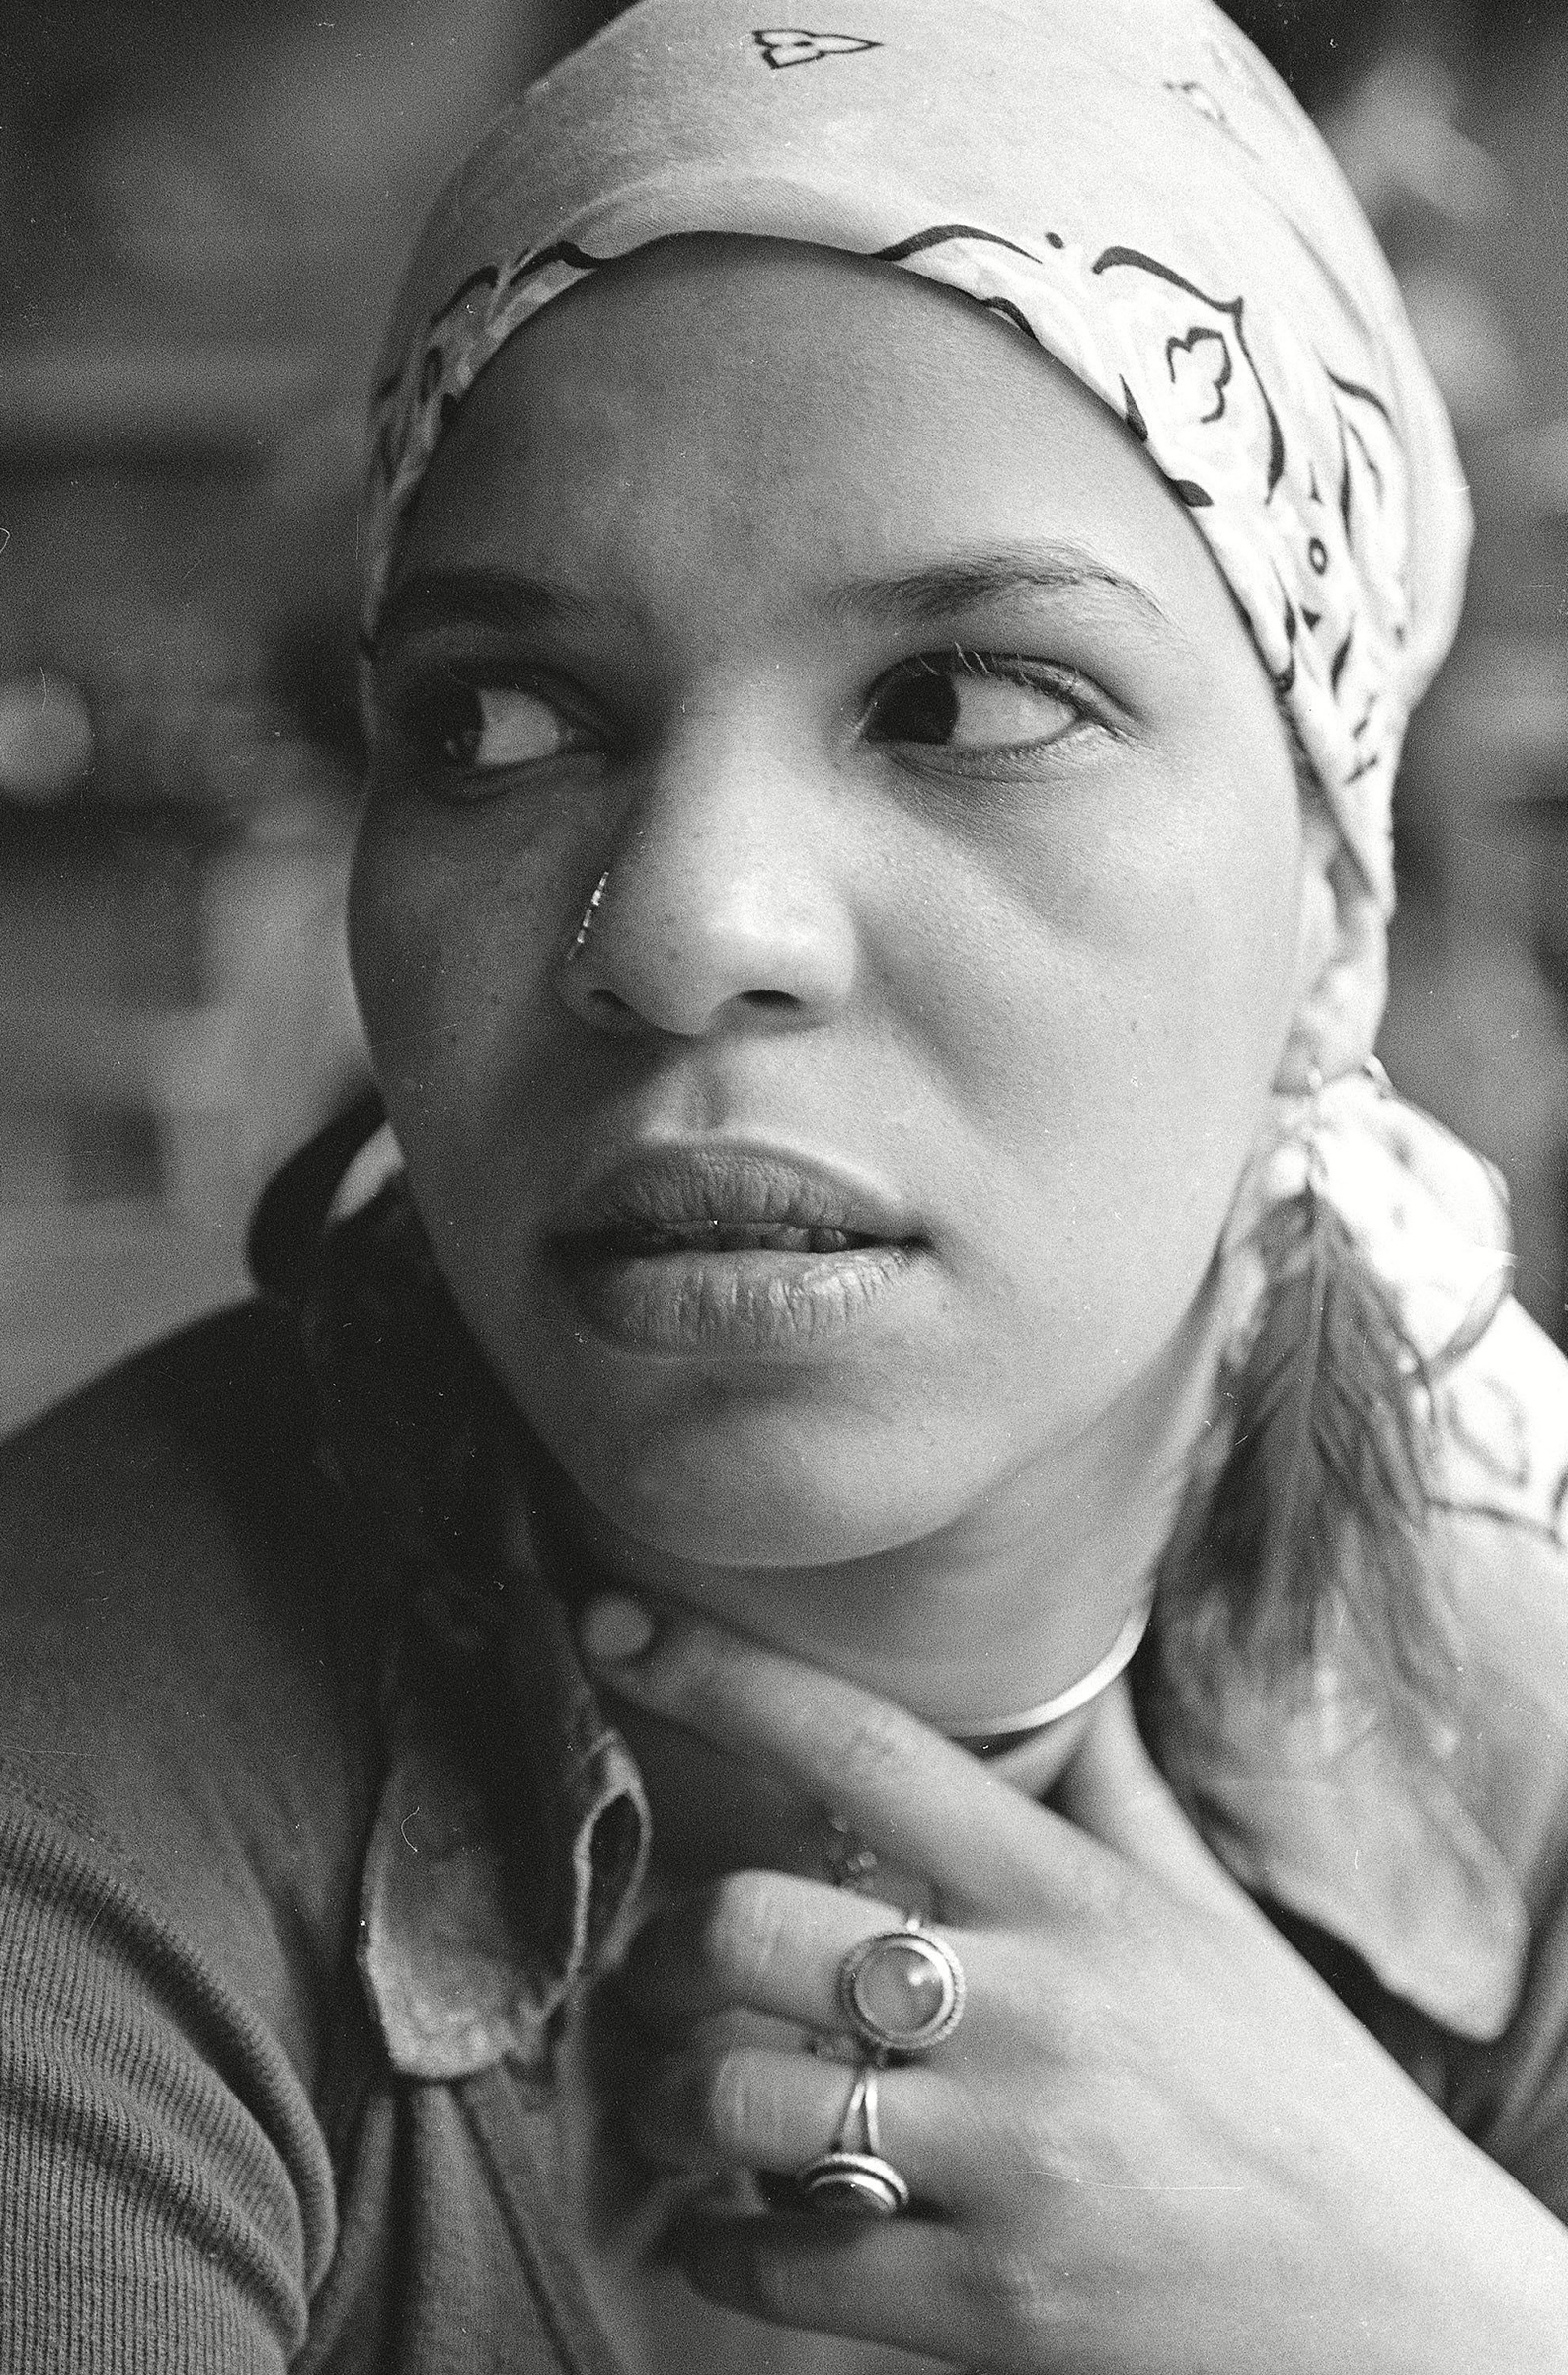 Shange in New York City in 1976, the year For Colored Girls premiered (AP/Shutterstock)